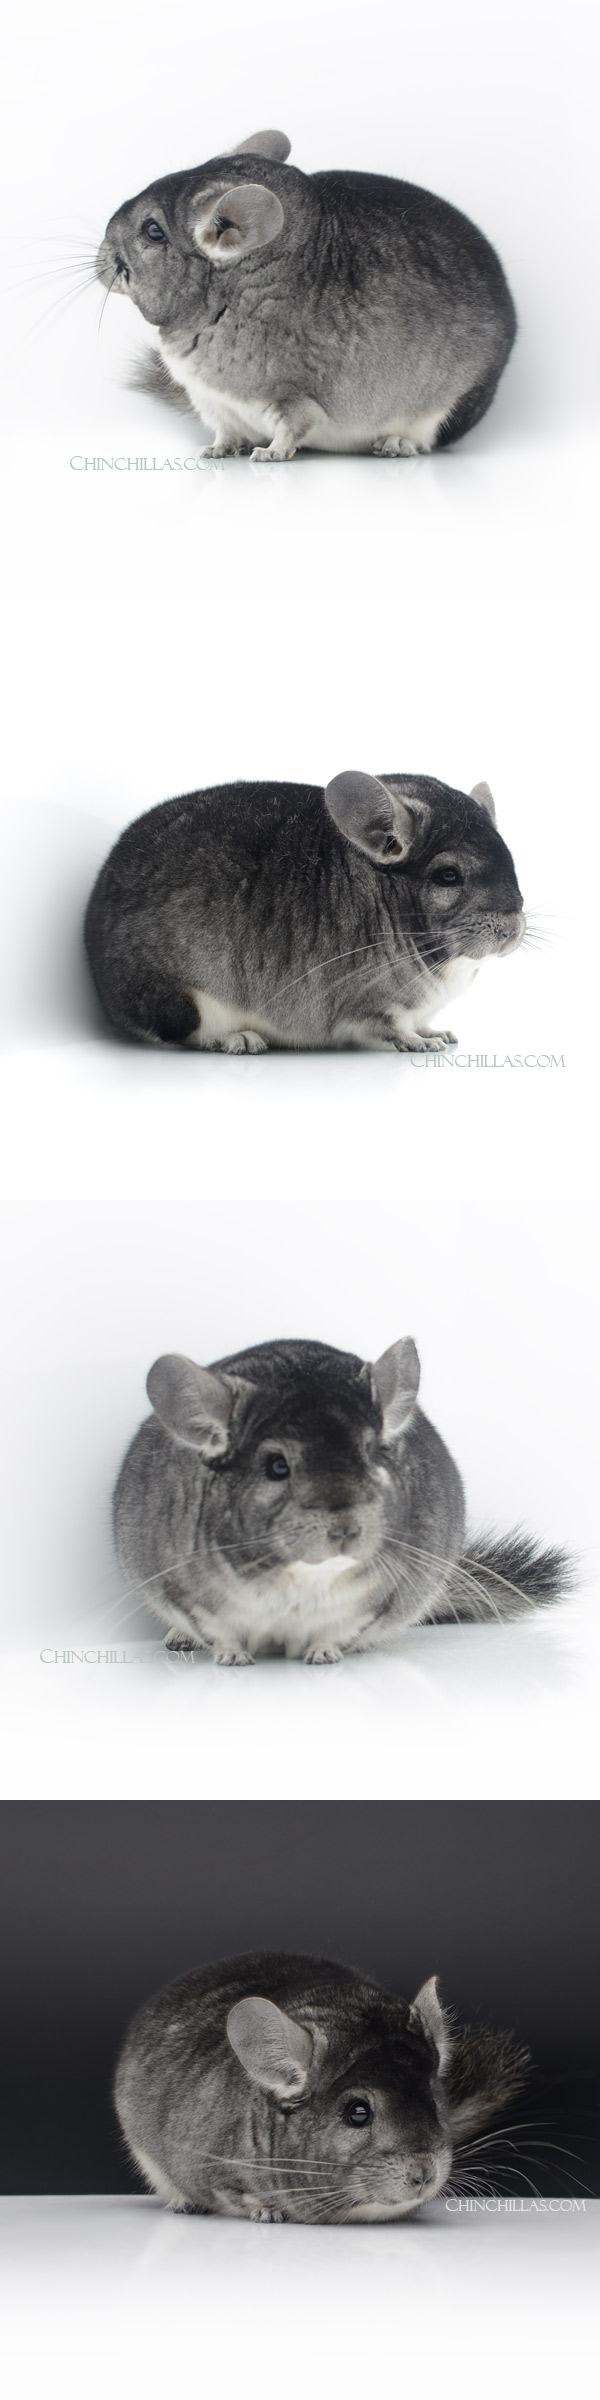 Chinchilla or related item offered for sale or export on Chinchillas.com - 23030 Large Blocky Premium Production Quality Standard Female Chinchilla